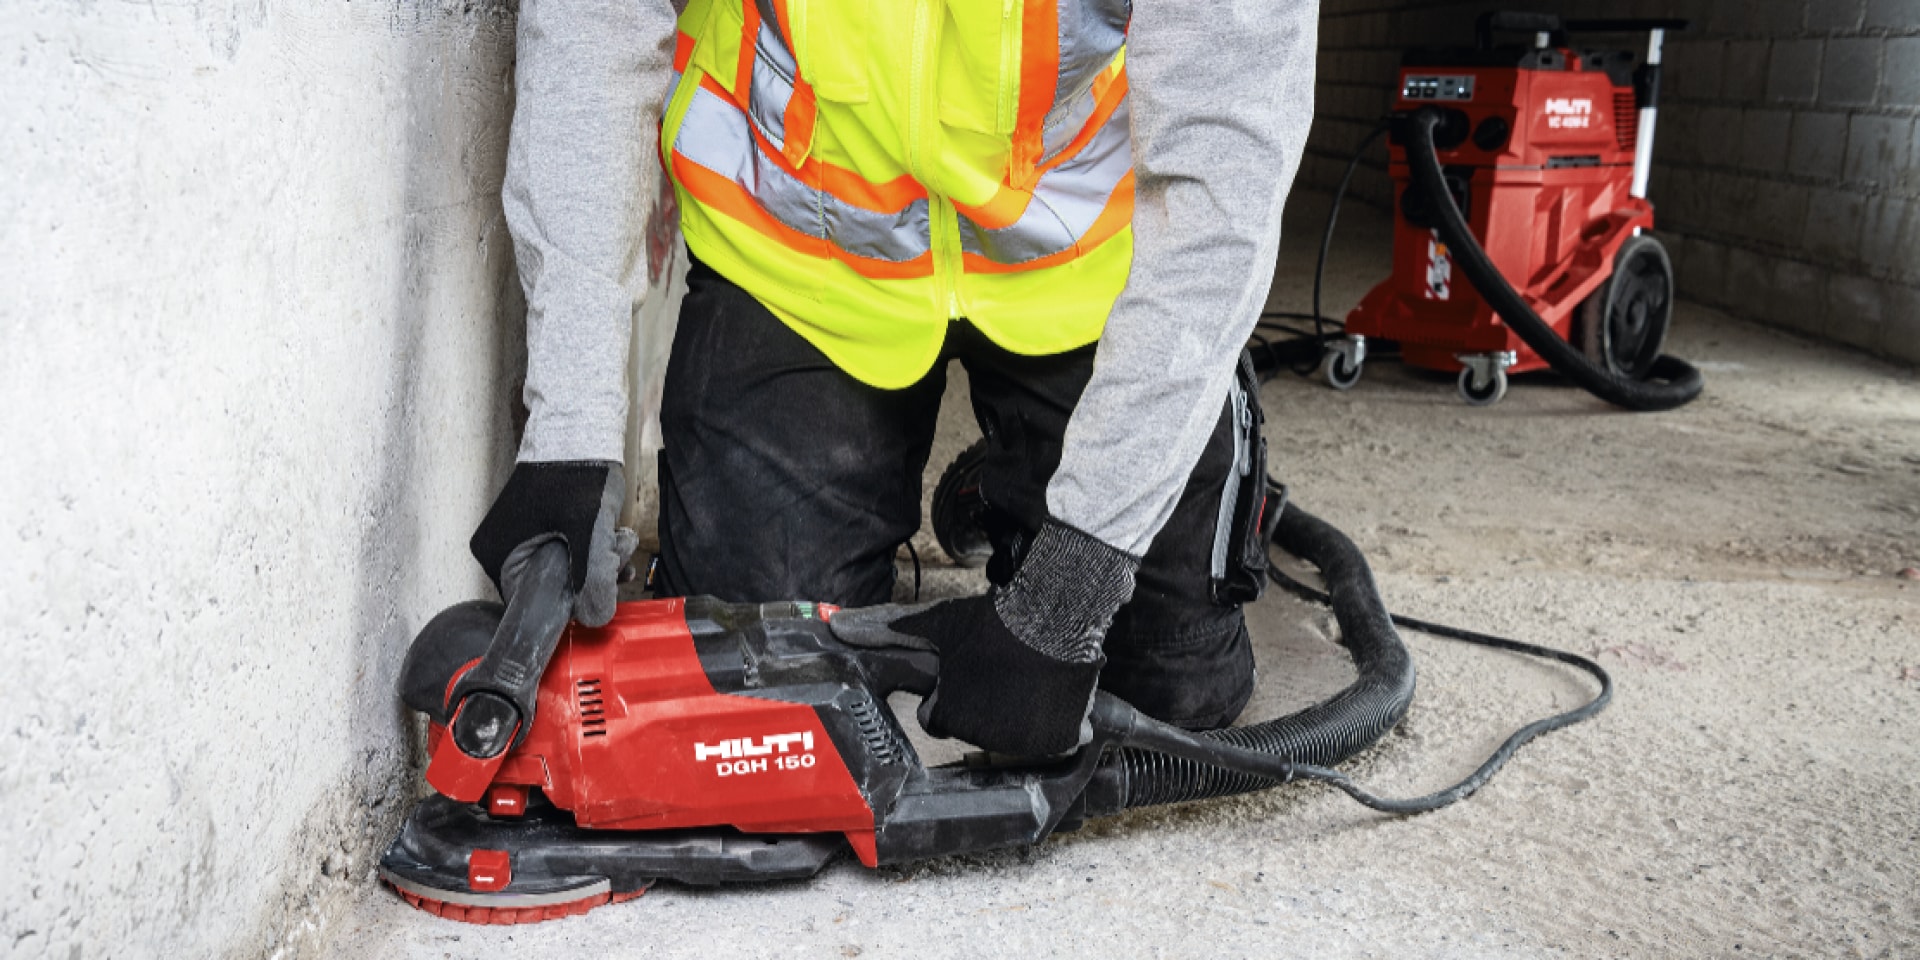 For virtually dust-free results combine tools like the DG 150 concrete grinder with a vacuum cleaner